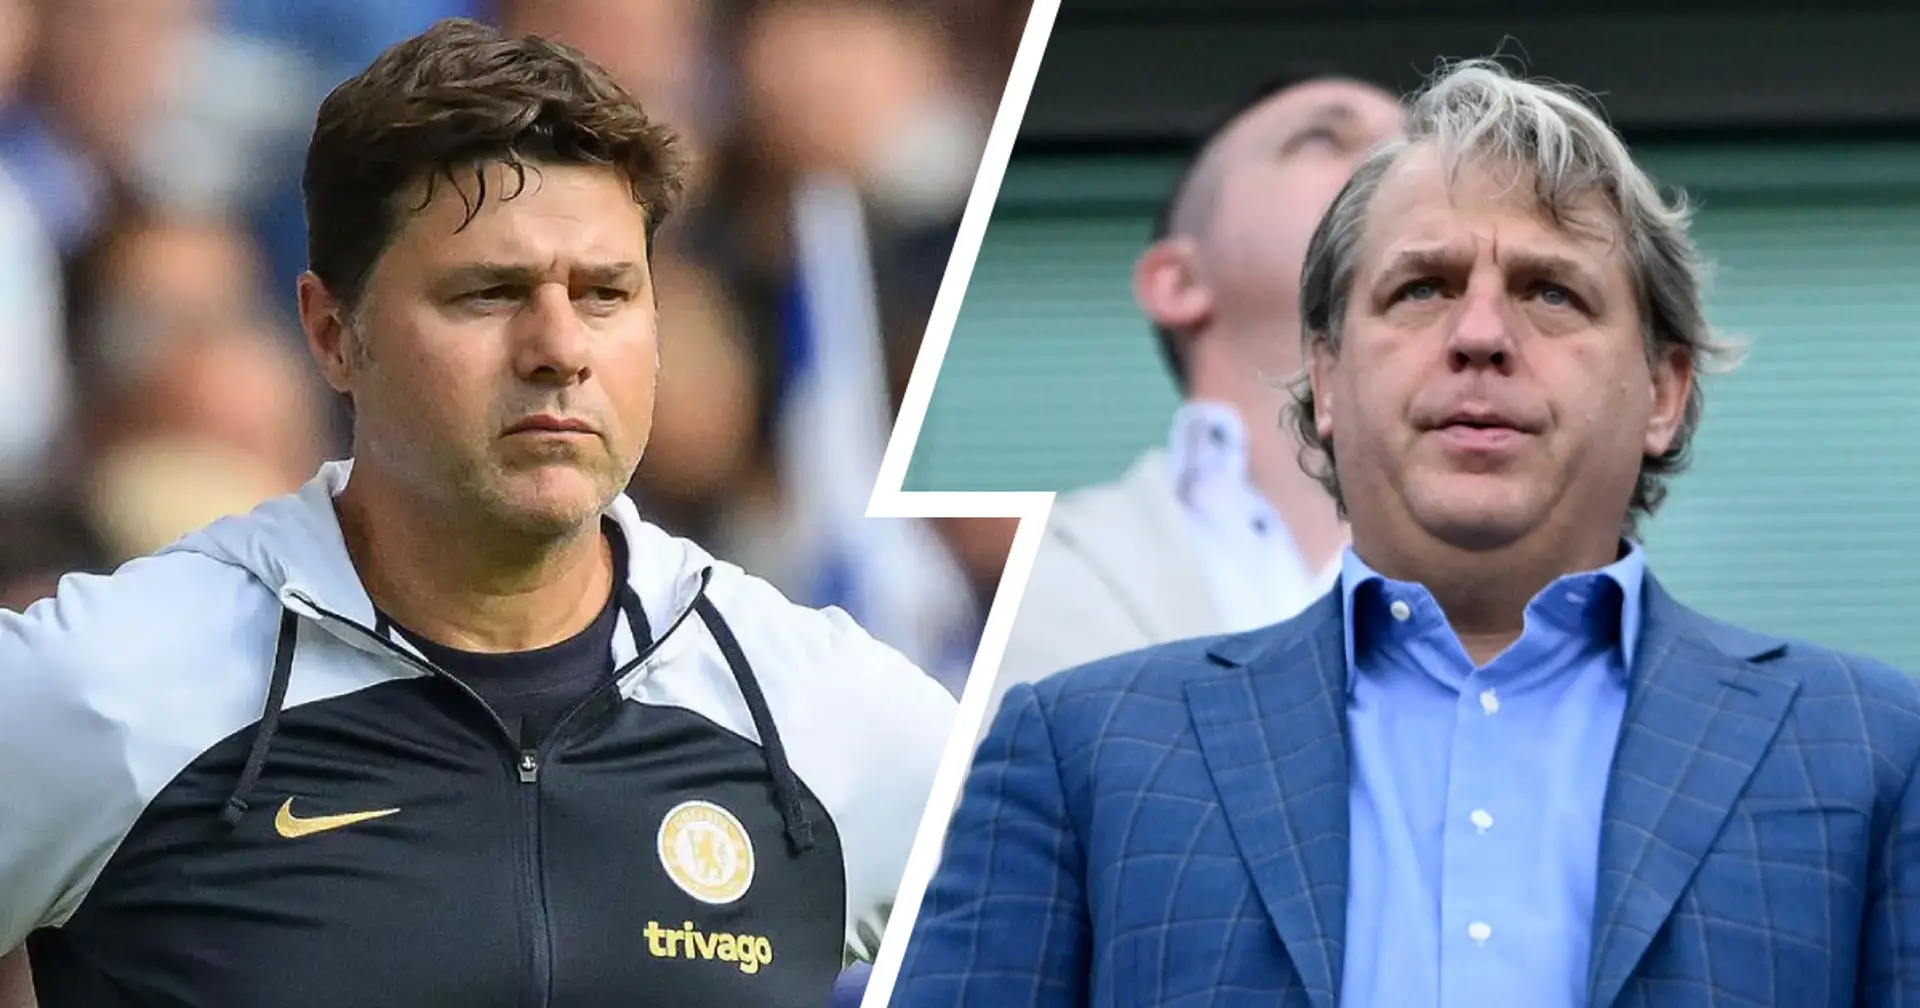 'We’re all part of one organisation': Chelsea insist owners still have full faith in Pochettino